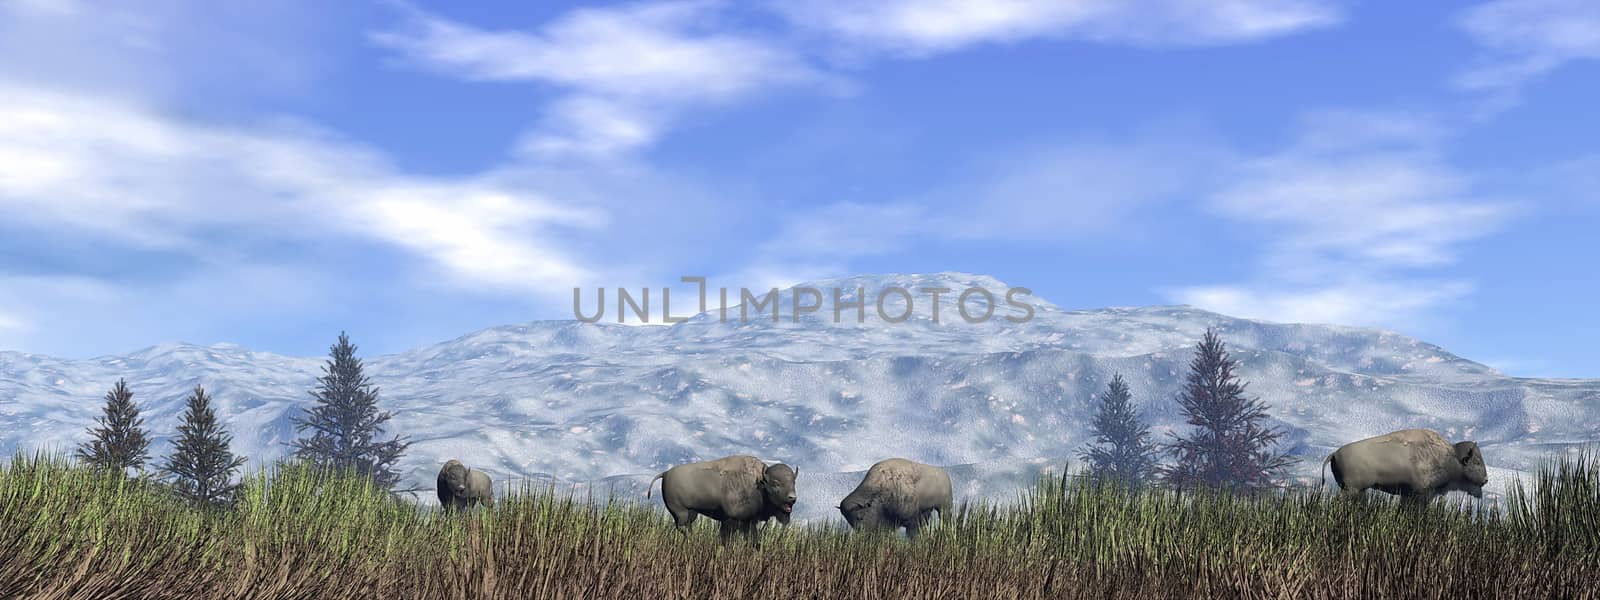 Herd of bisons in the green grass next to fir trees and in front of a mountain by cloudy day